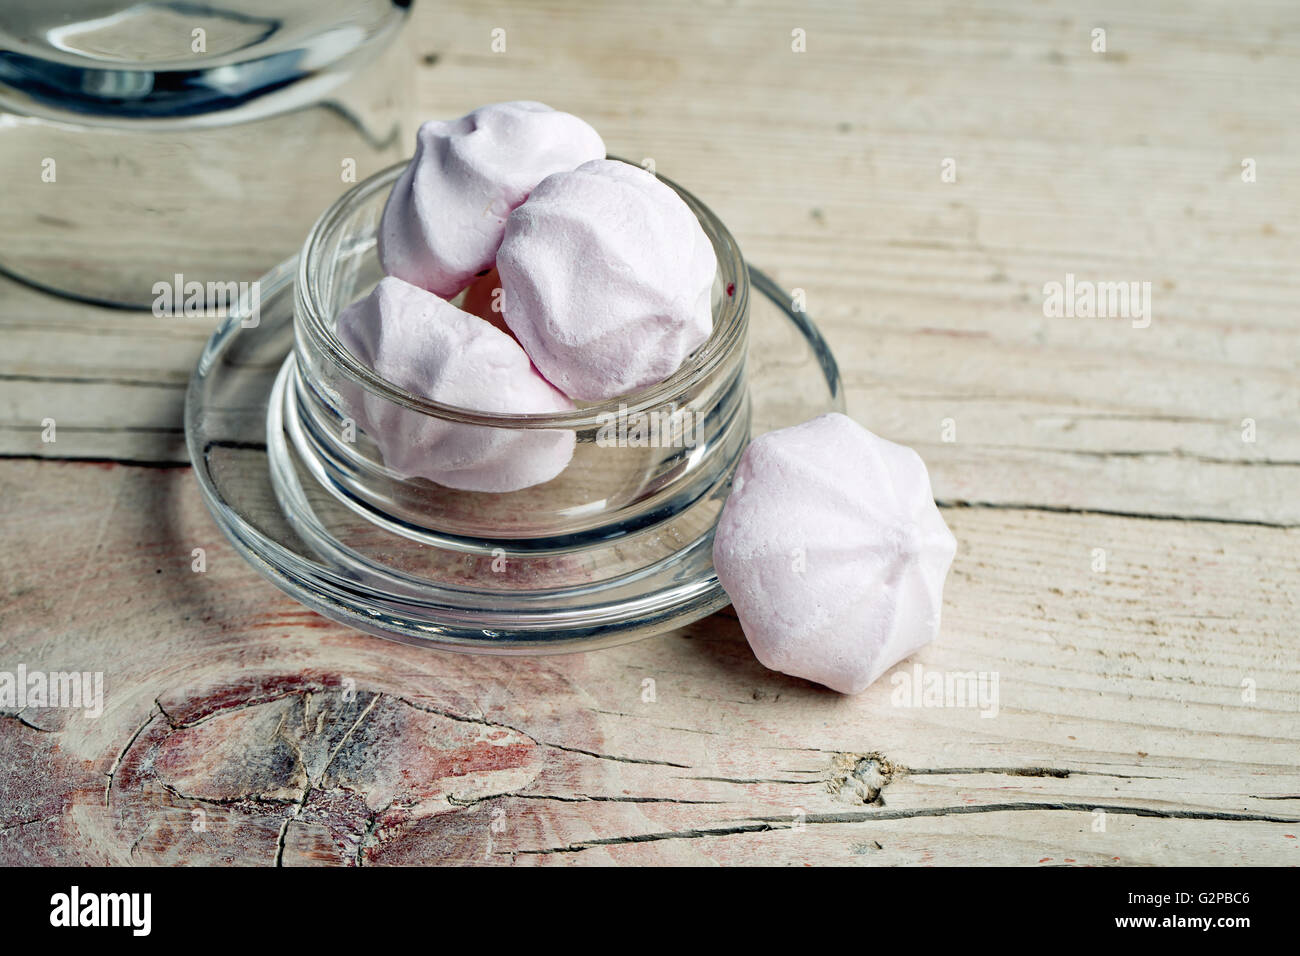 Sweet Meringue in soft Pastel Colors in glass bowl Stock Photo